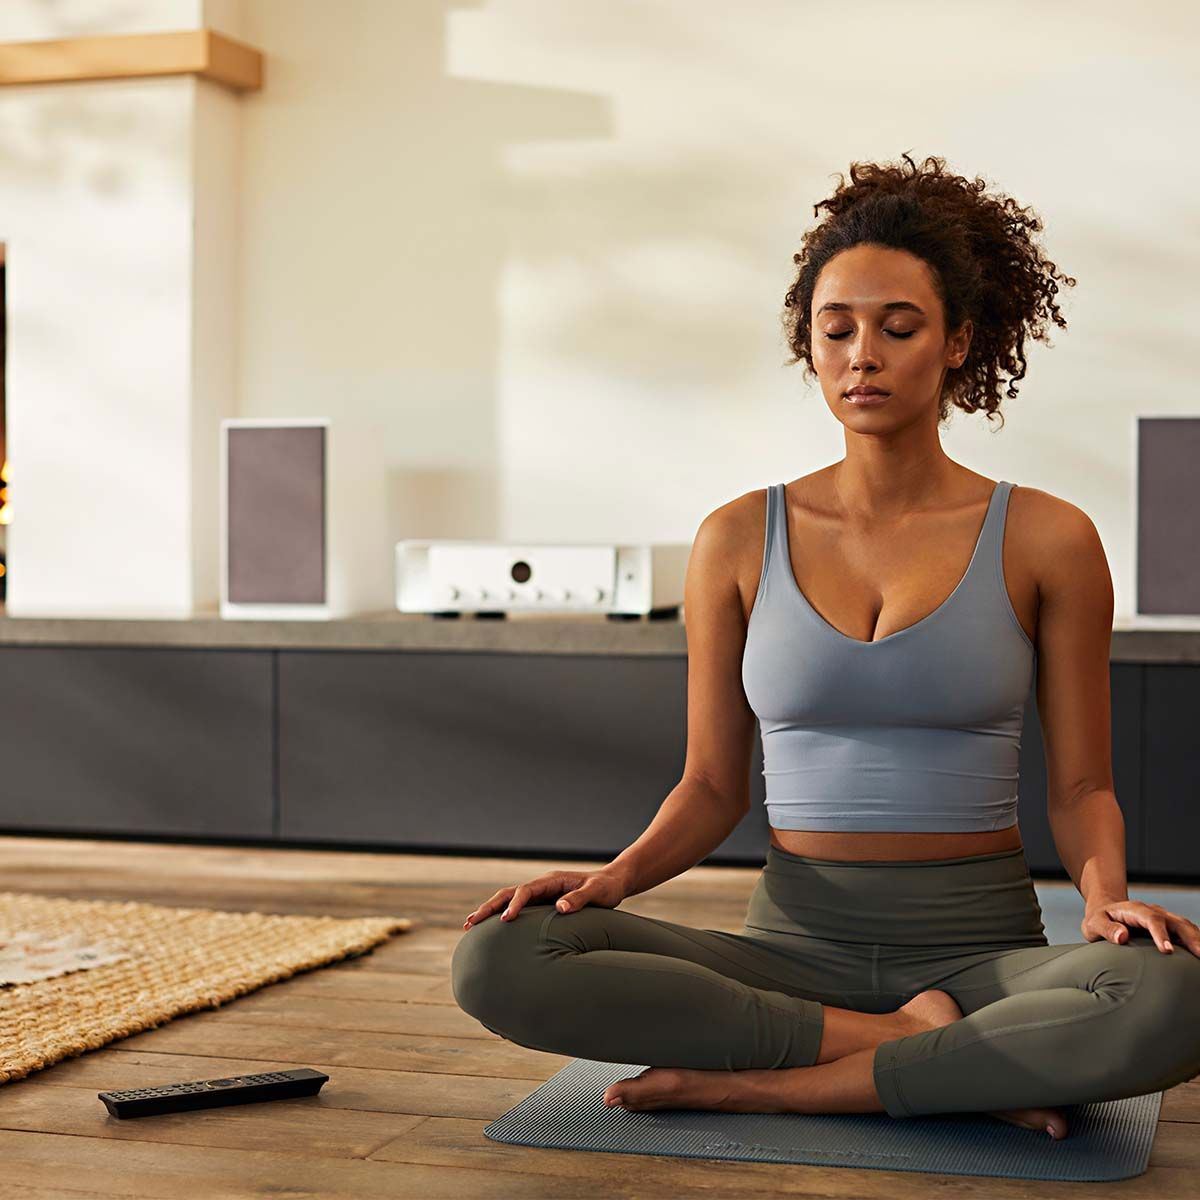 Marantz Model 40n Integrated Amplifier, Silver and Gold, on shelf behind woman doing yoga